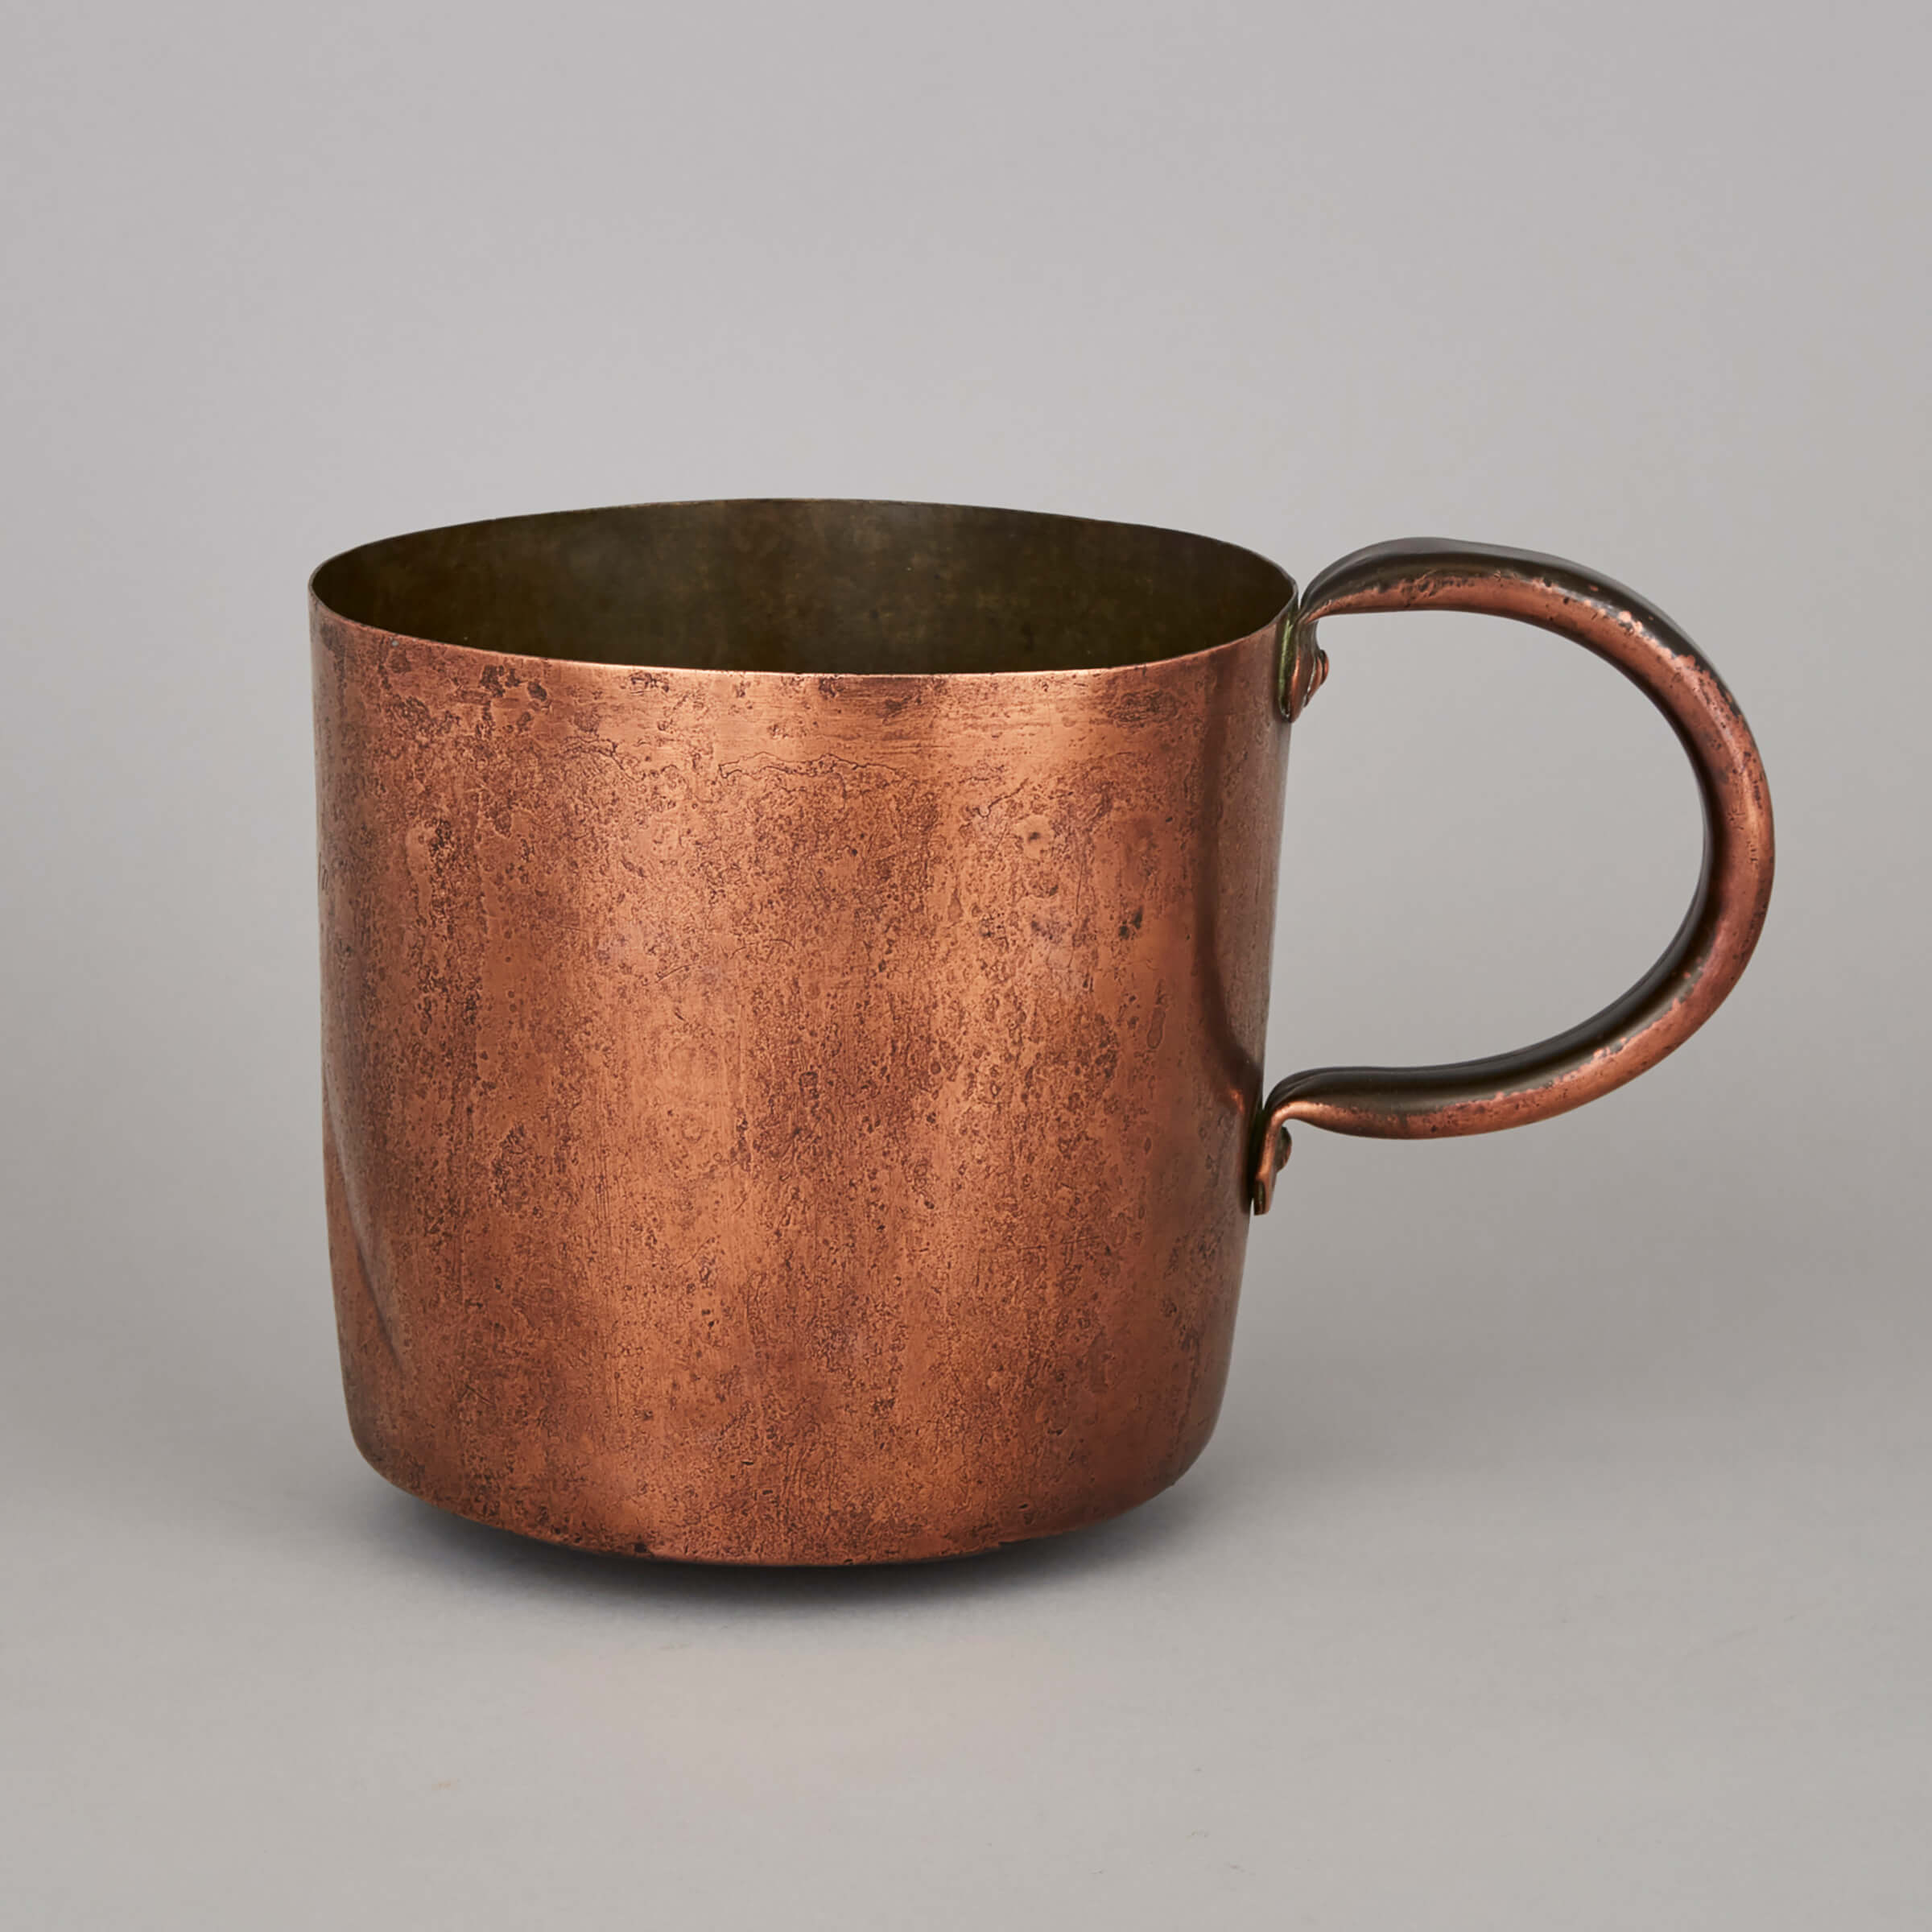 Royal Navy Copper One Gallon Rum Measure, 18th/19th century